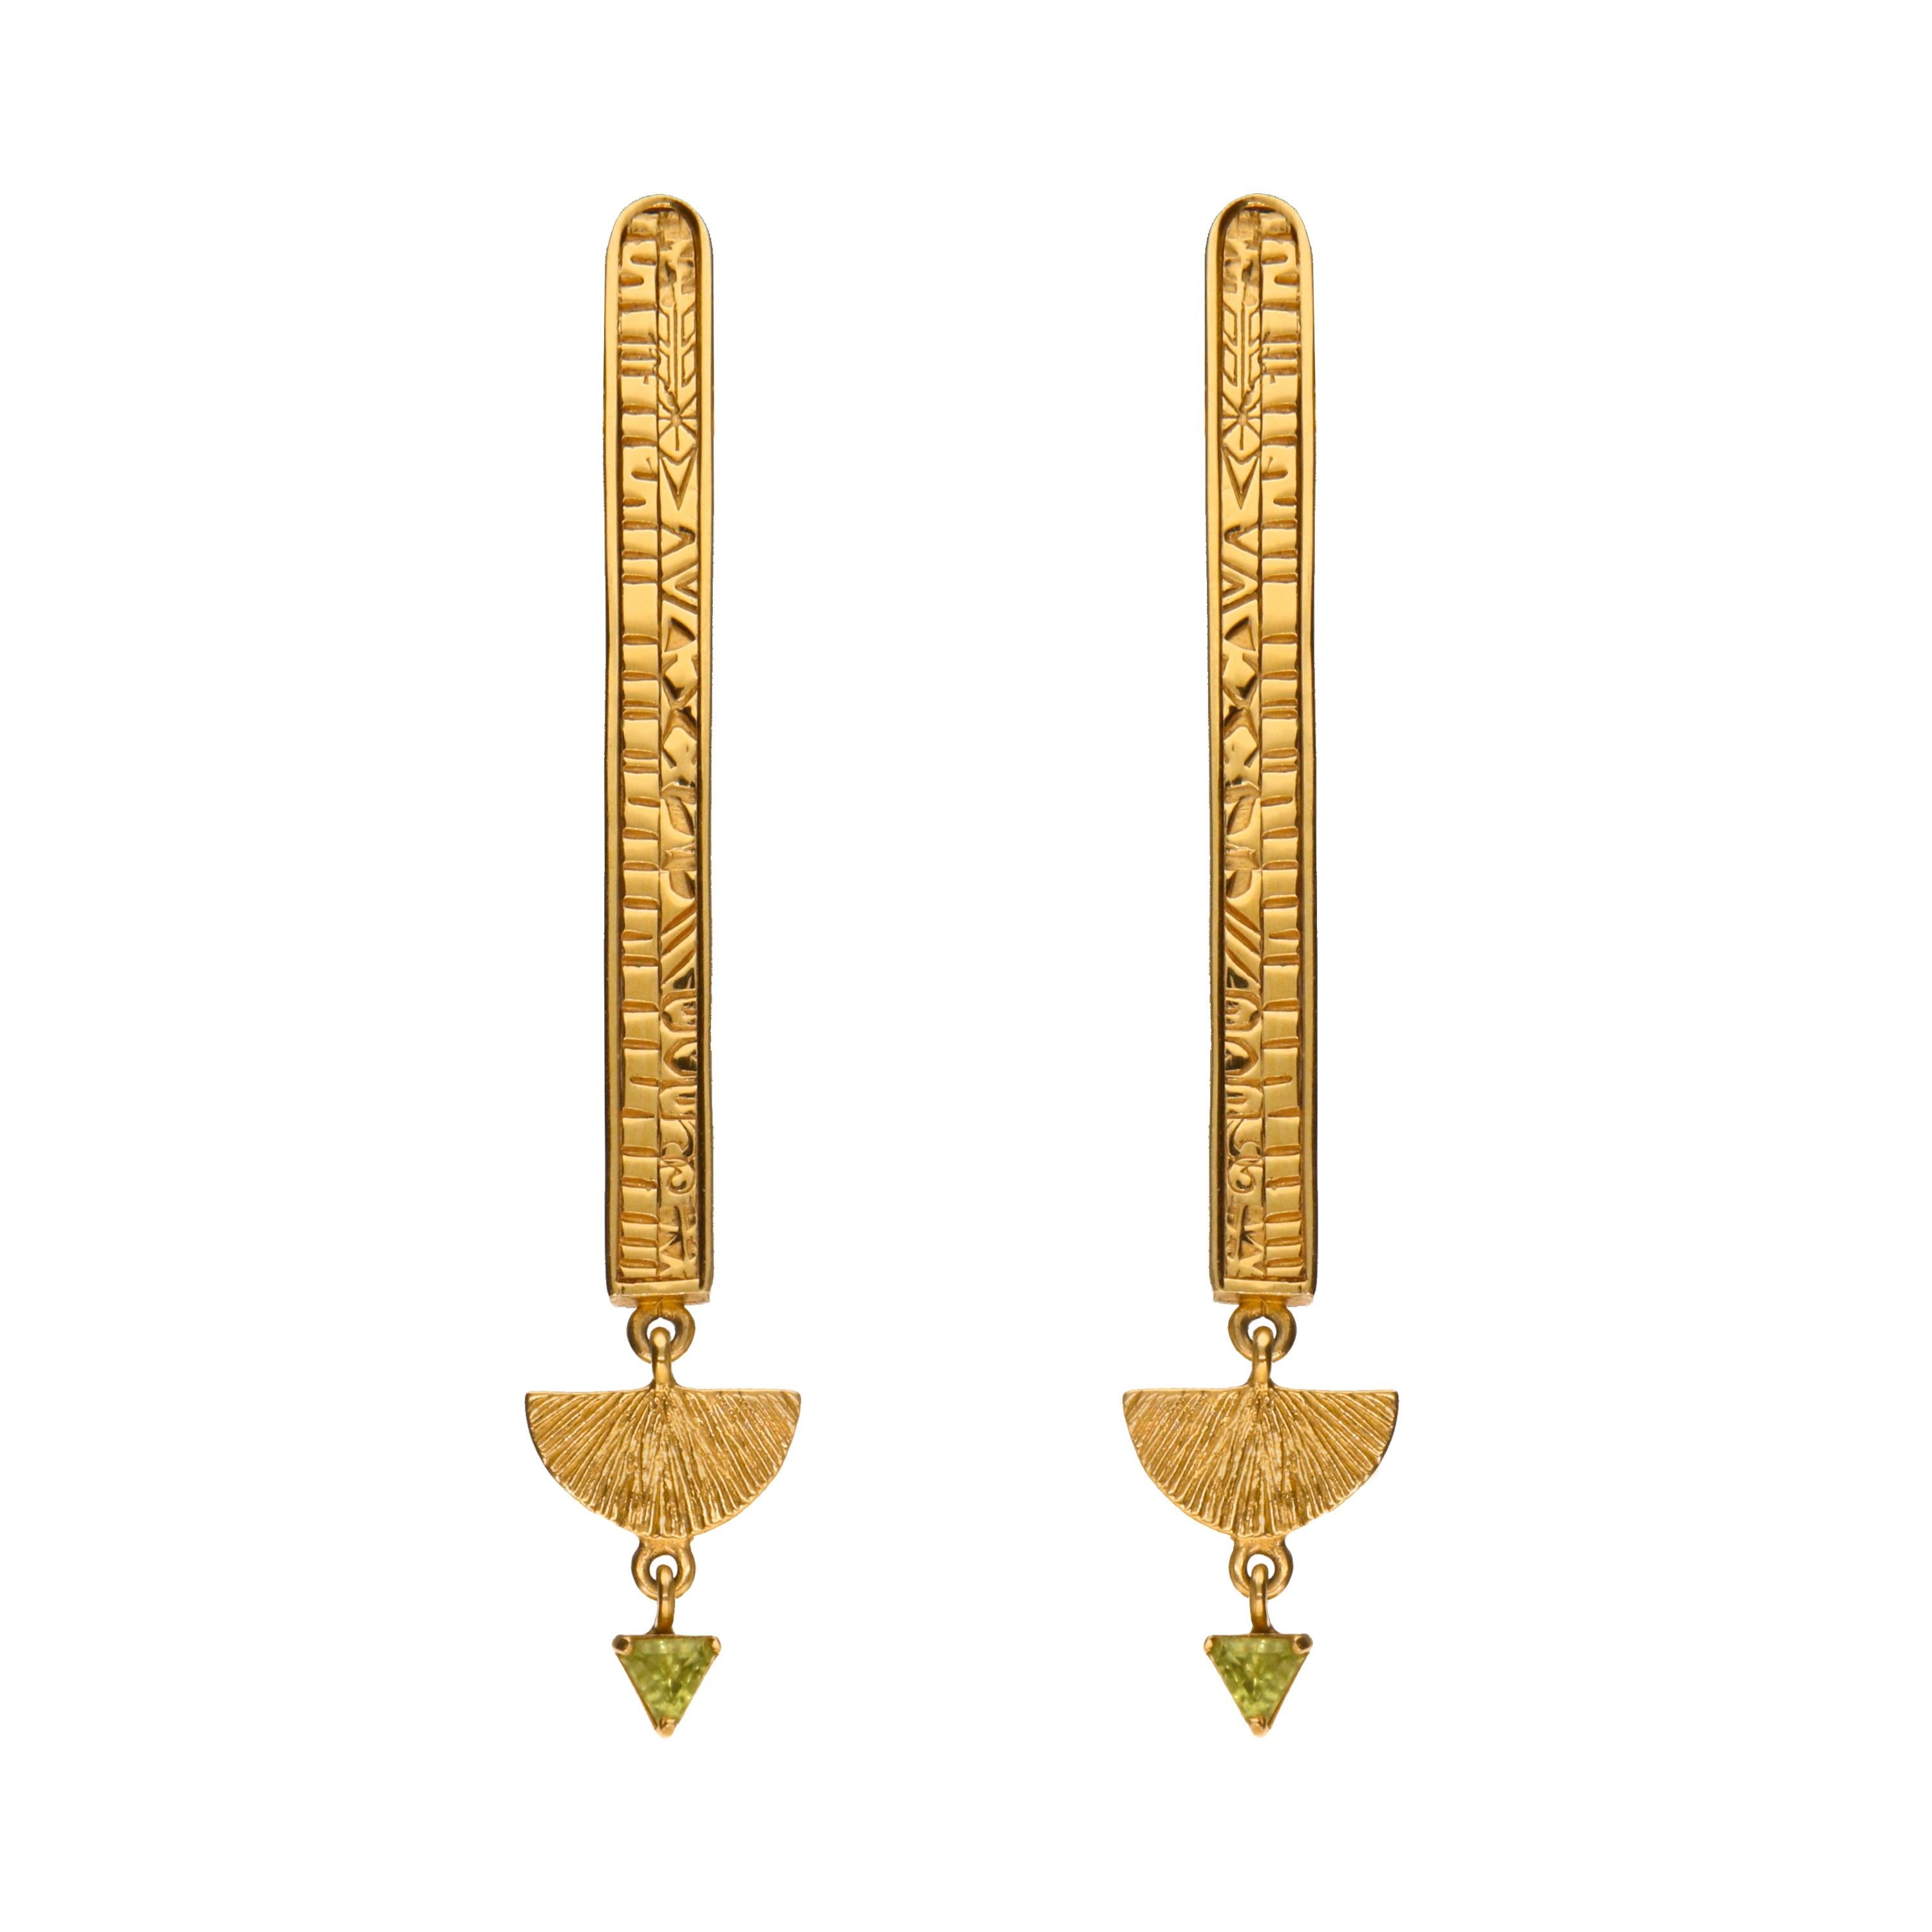 Cleo Earrings in 14k Yellow Gold: an Ode to Ancient Egypt For Sale 1